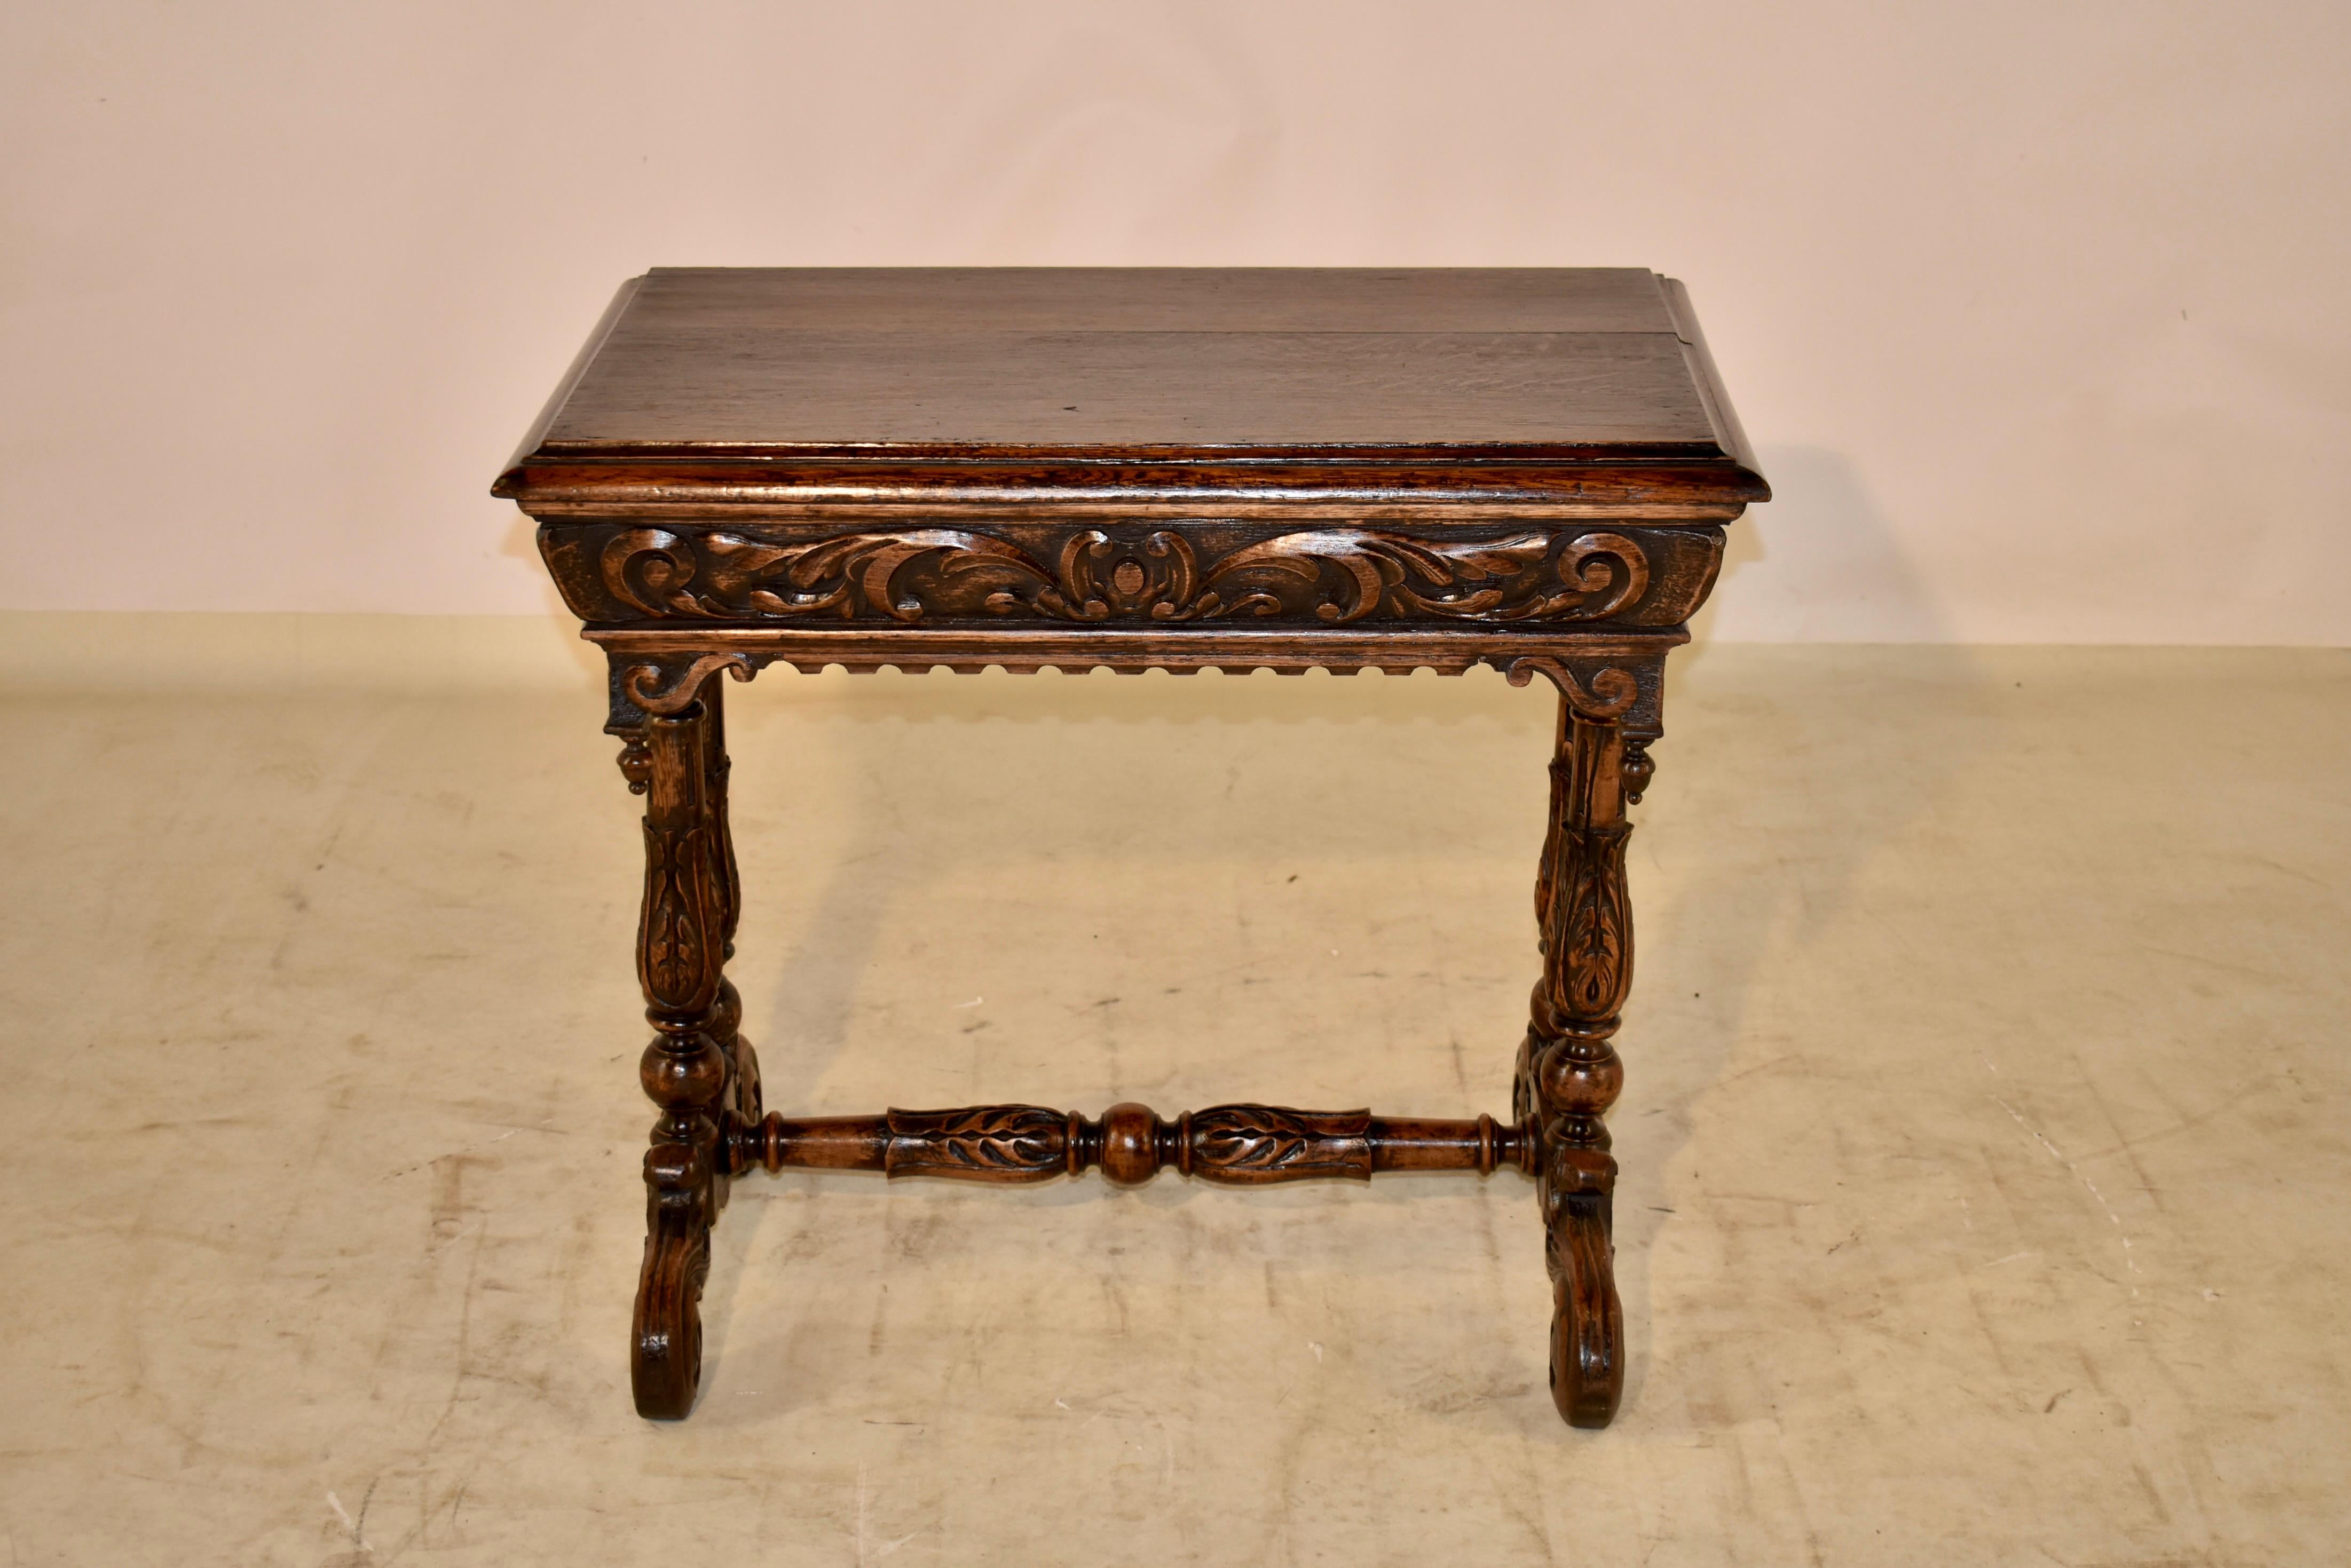 19th century oak side table from France.  The top has a stacked beveled edge, and follows down to a carved apron on all four sides, for easy placement in any room.  There is a scalloped and hand turned finial decoration on the sides as well.  The